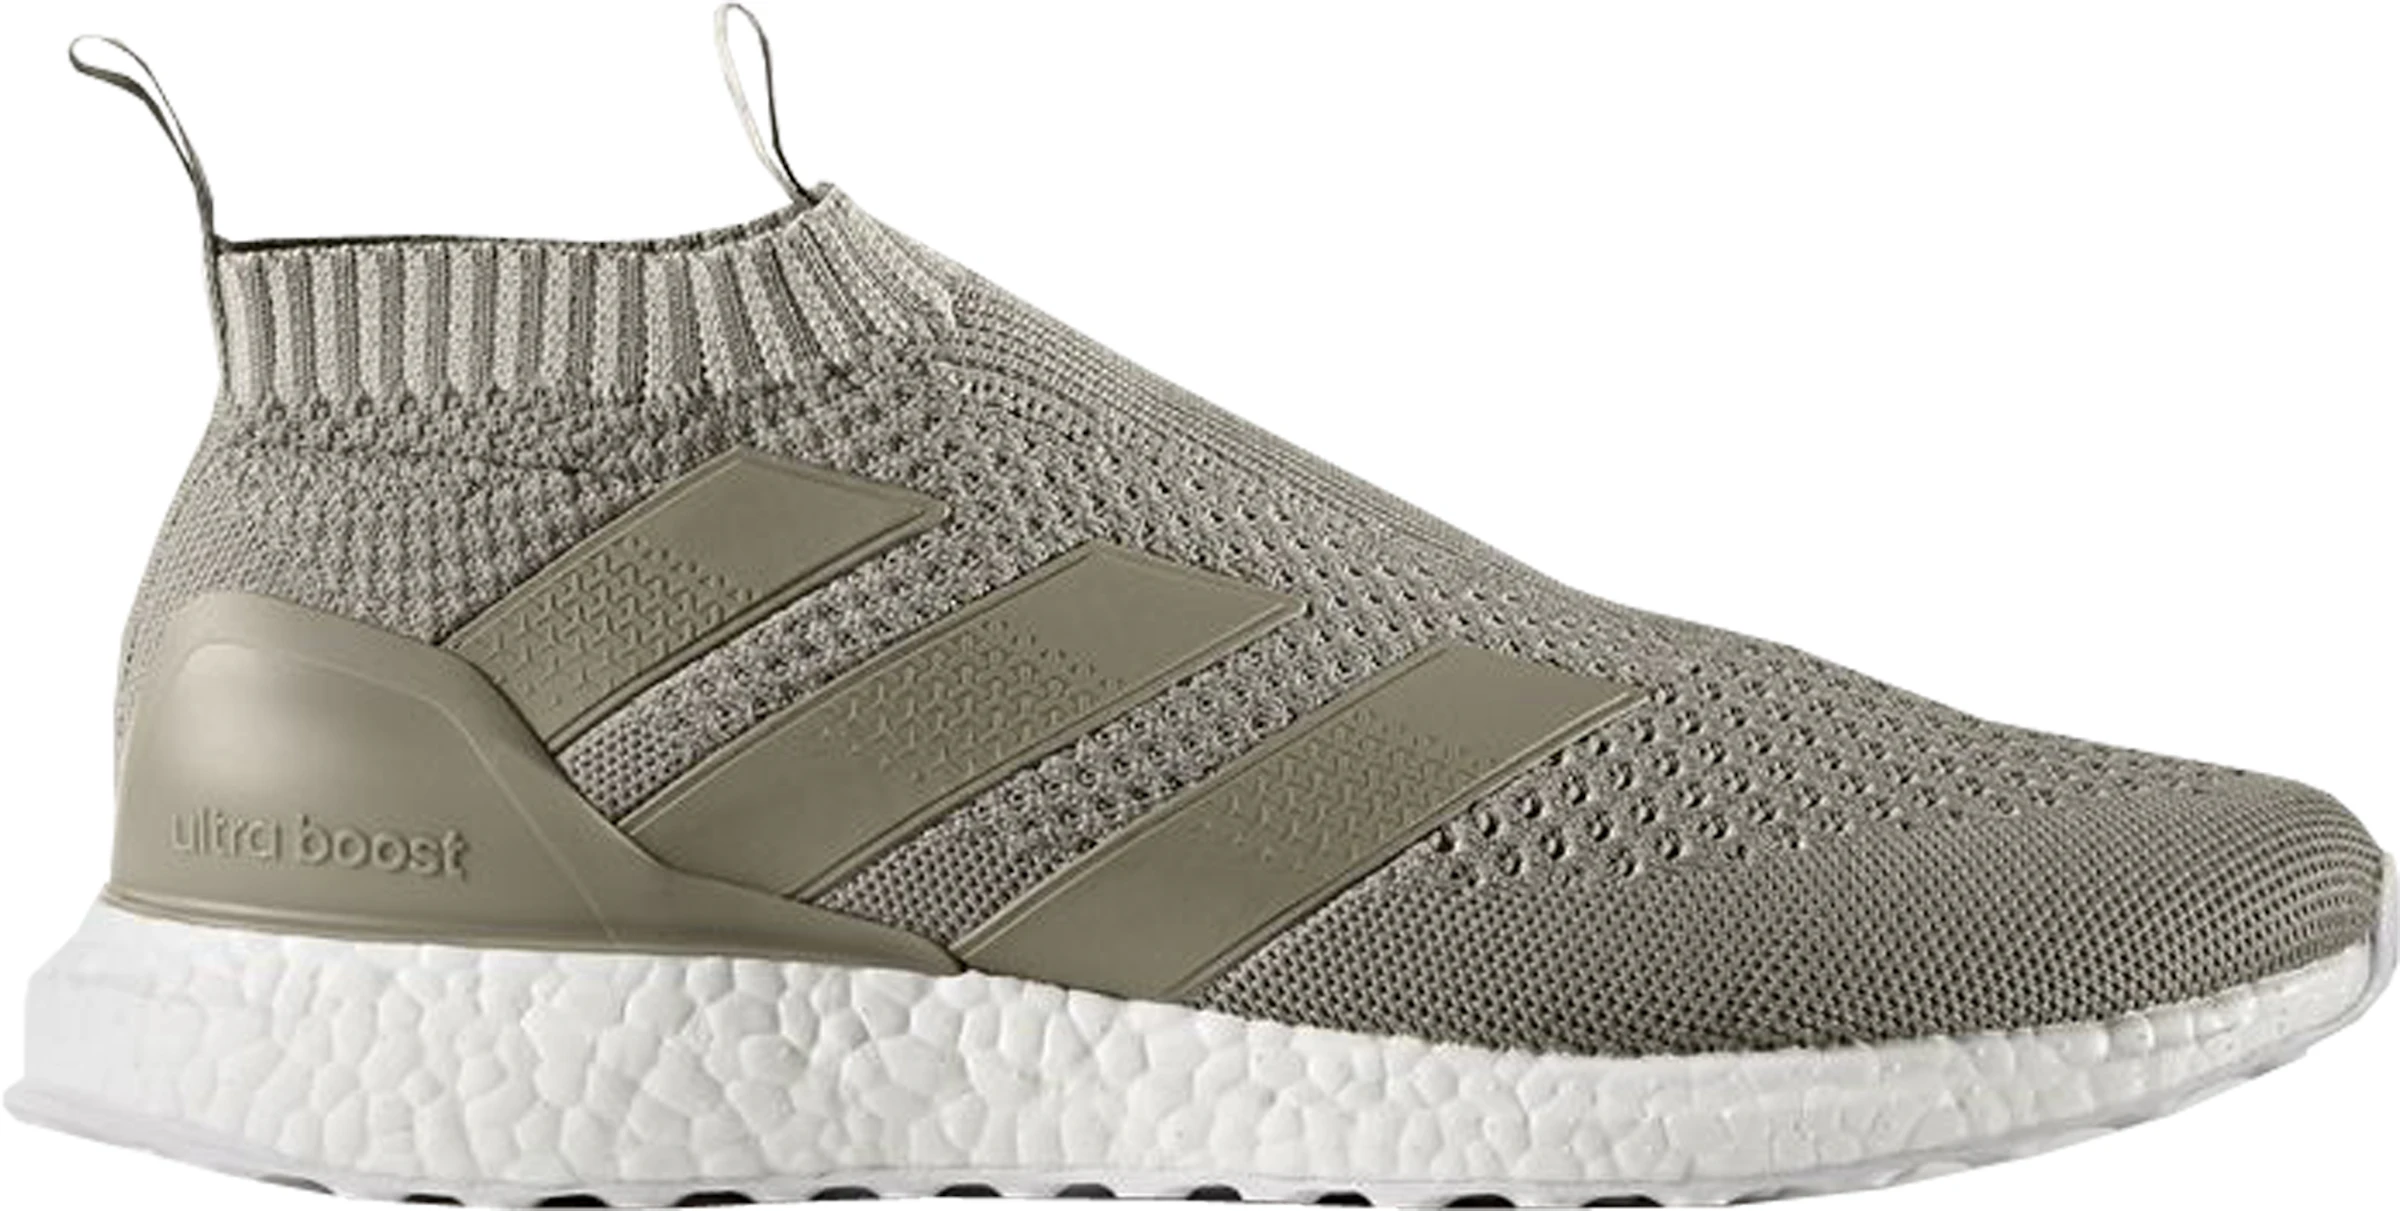 groentje Er is een trend ongezond adidas ACE 16+ Purecontrol Ultra Boost Clay - CG3655 - US